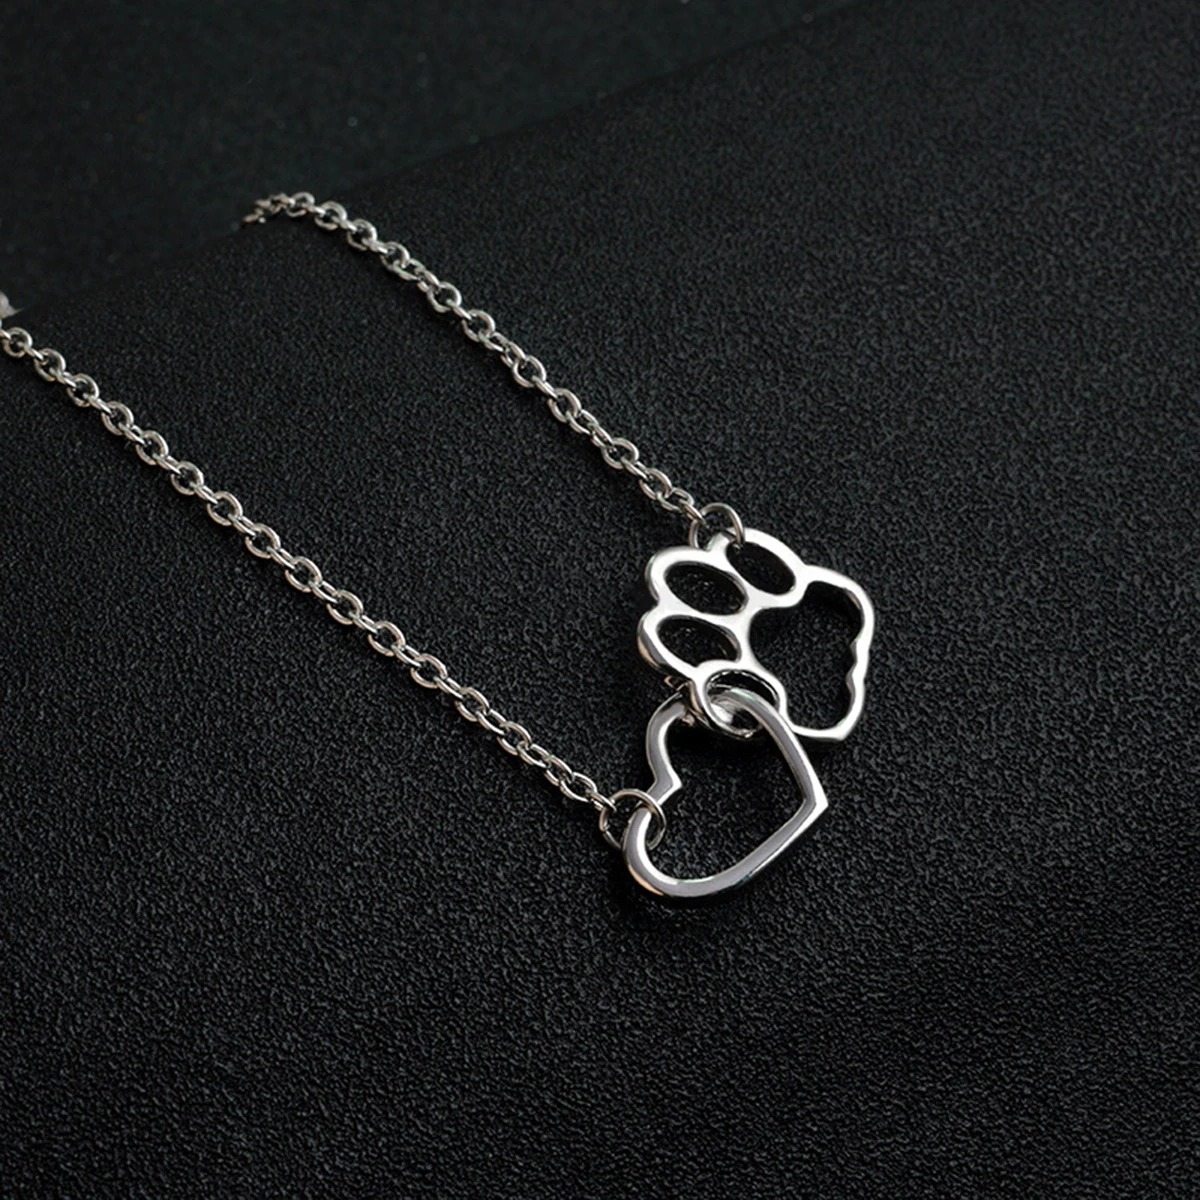 Hollow Pet Paw Footprint Necklaces Shellhard Cute Animal Dog Cat Love Heart Pendant Necklace For Women Girls Jewelry Necklace